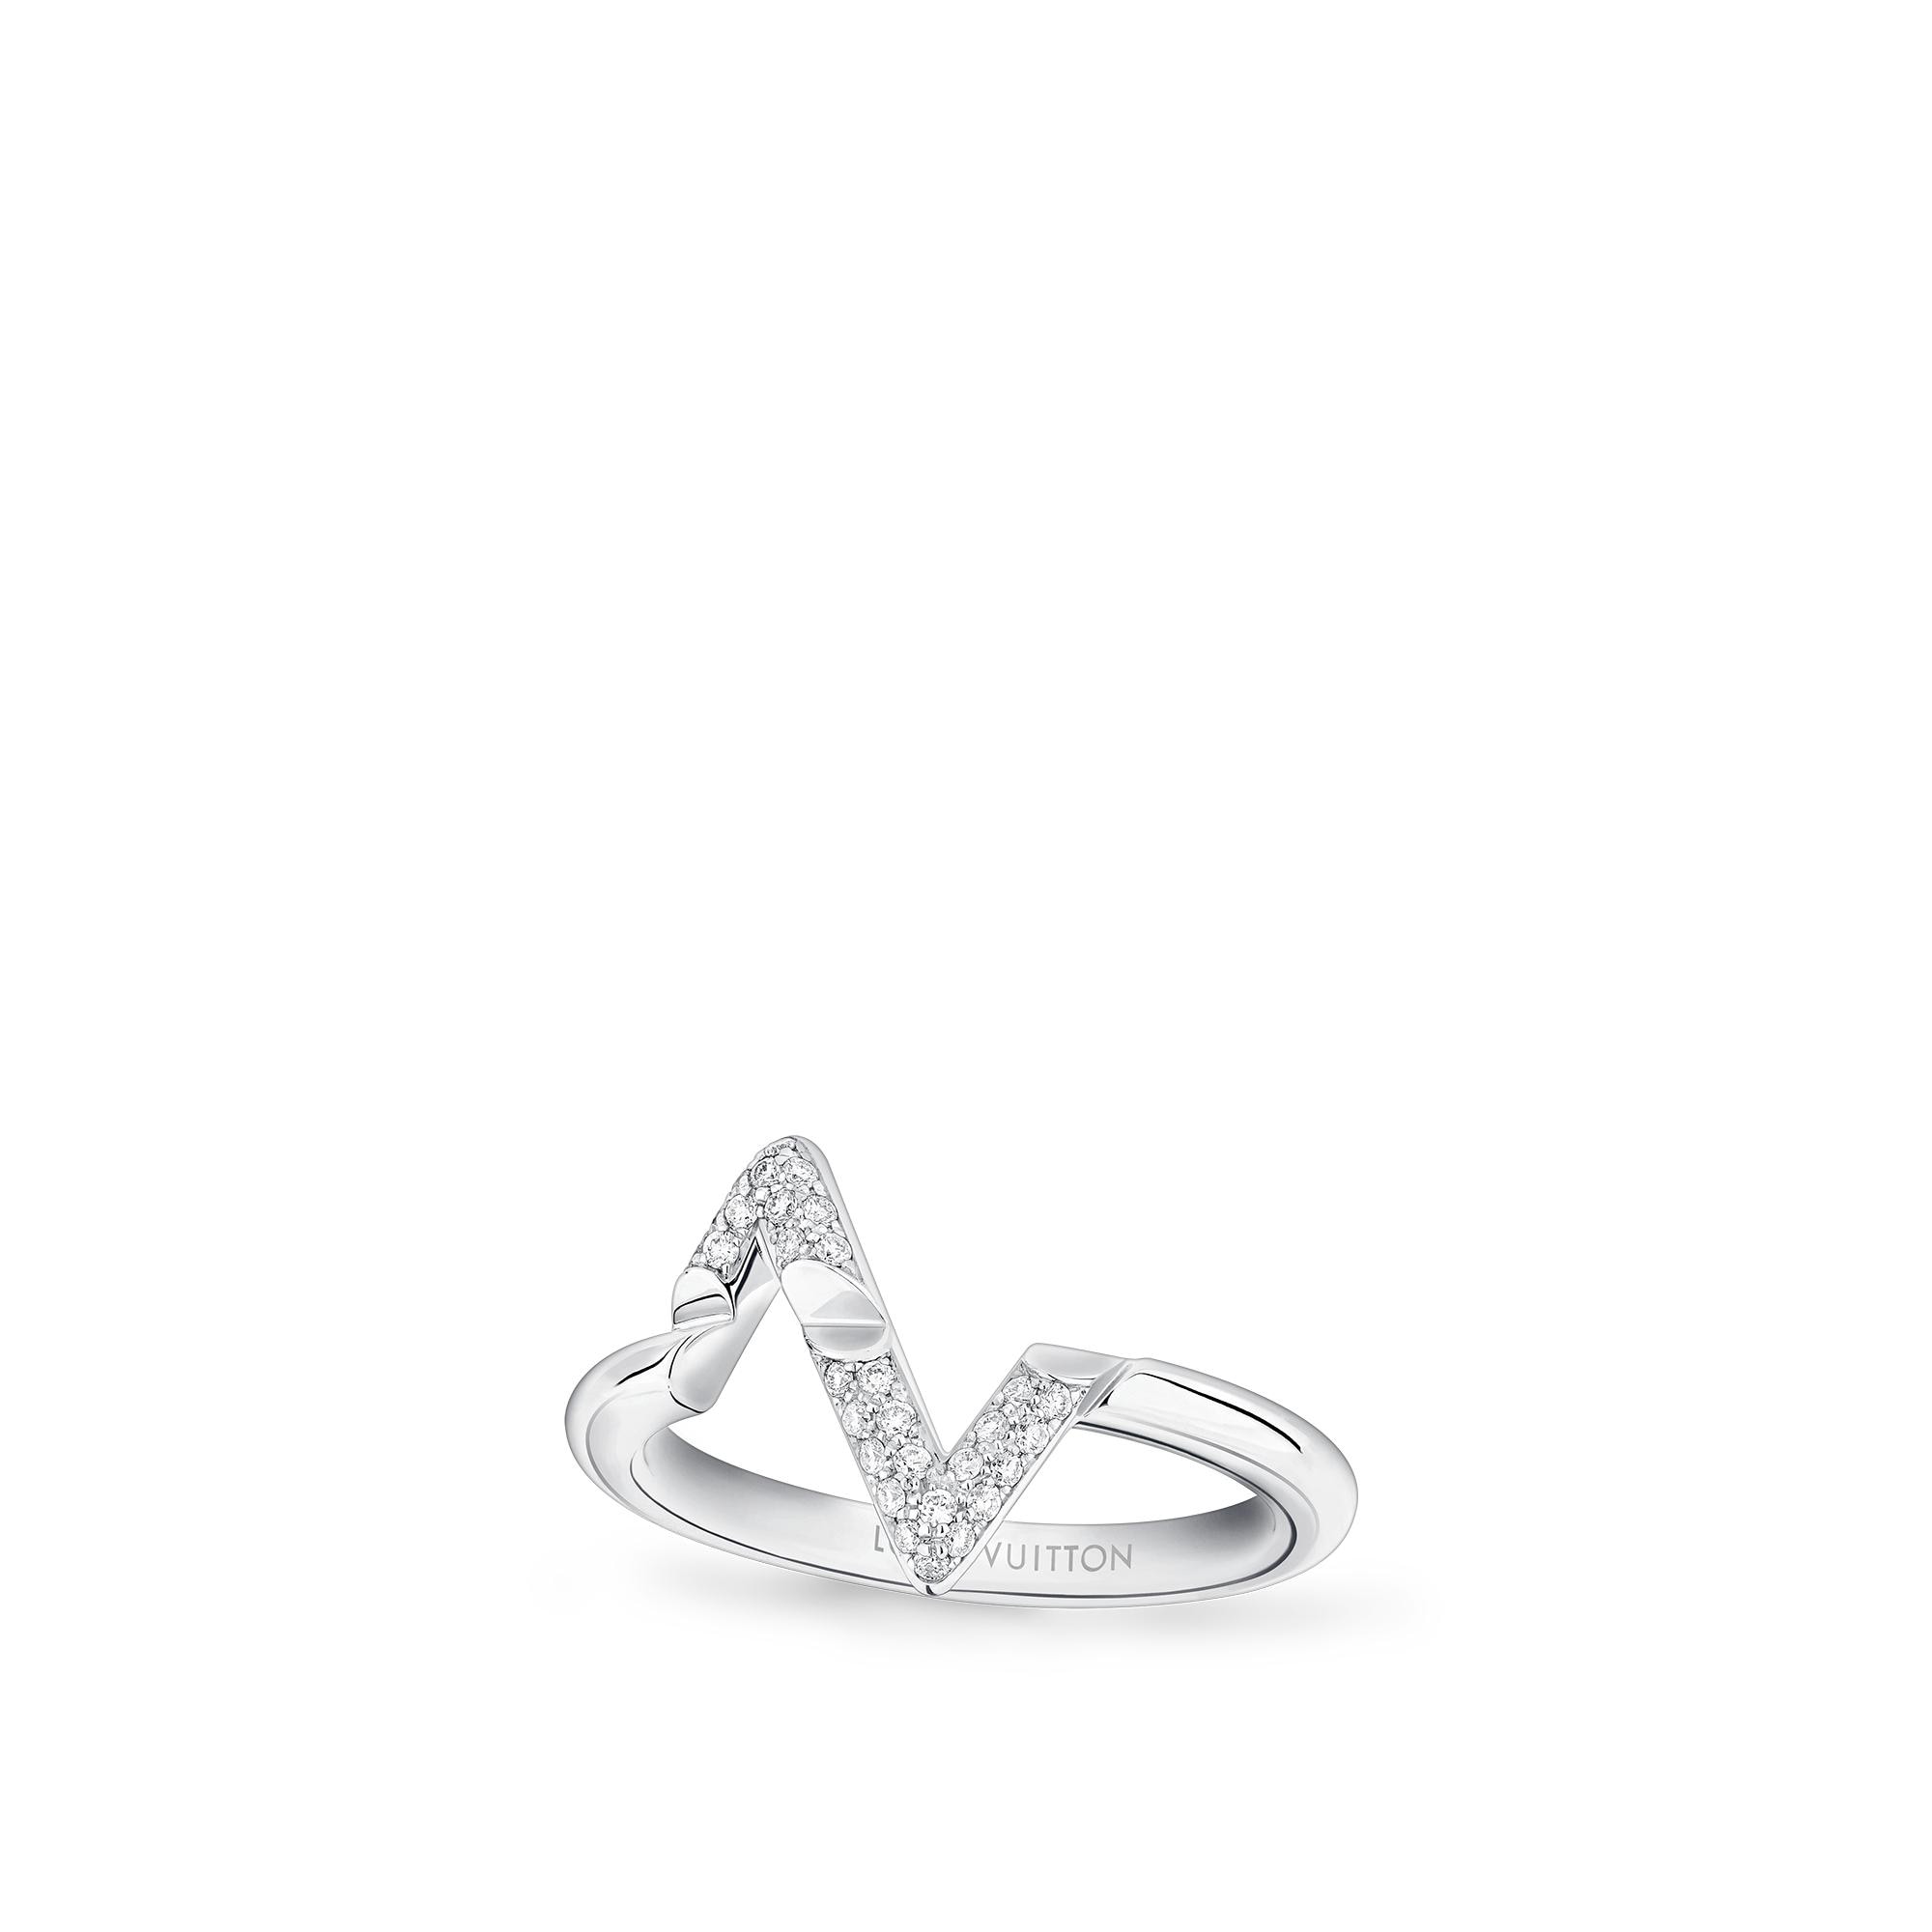 Louis Vuitton LV Volt Upside Down Ring, White Gold And Diamonds – WOMEN – Jewelry Q9Q31A